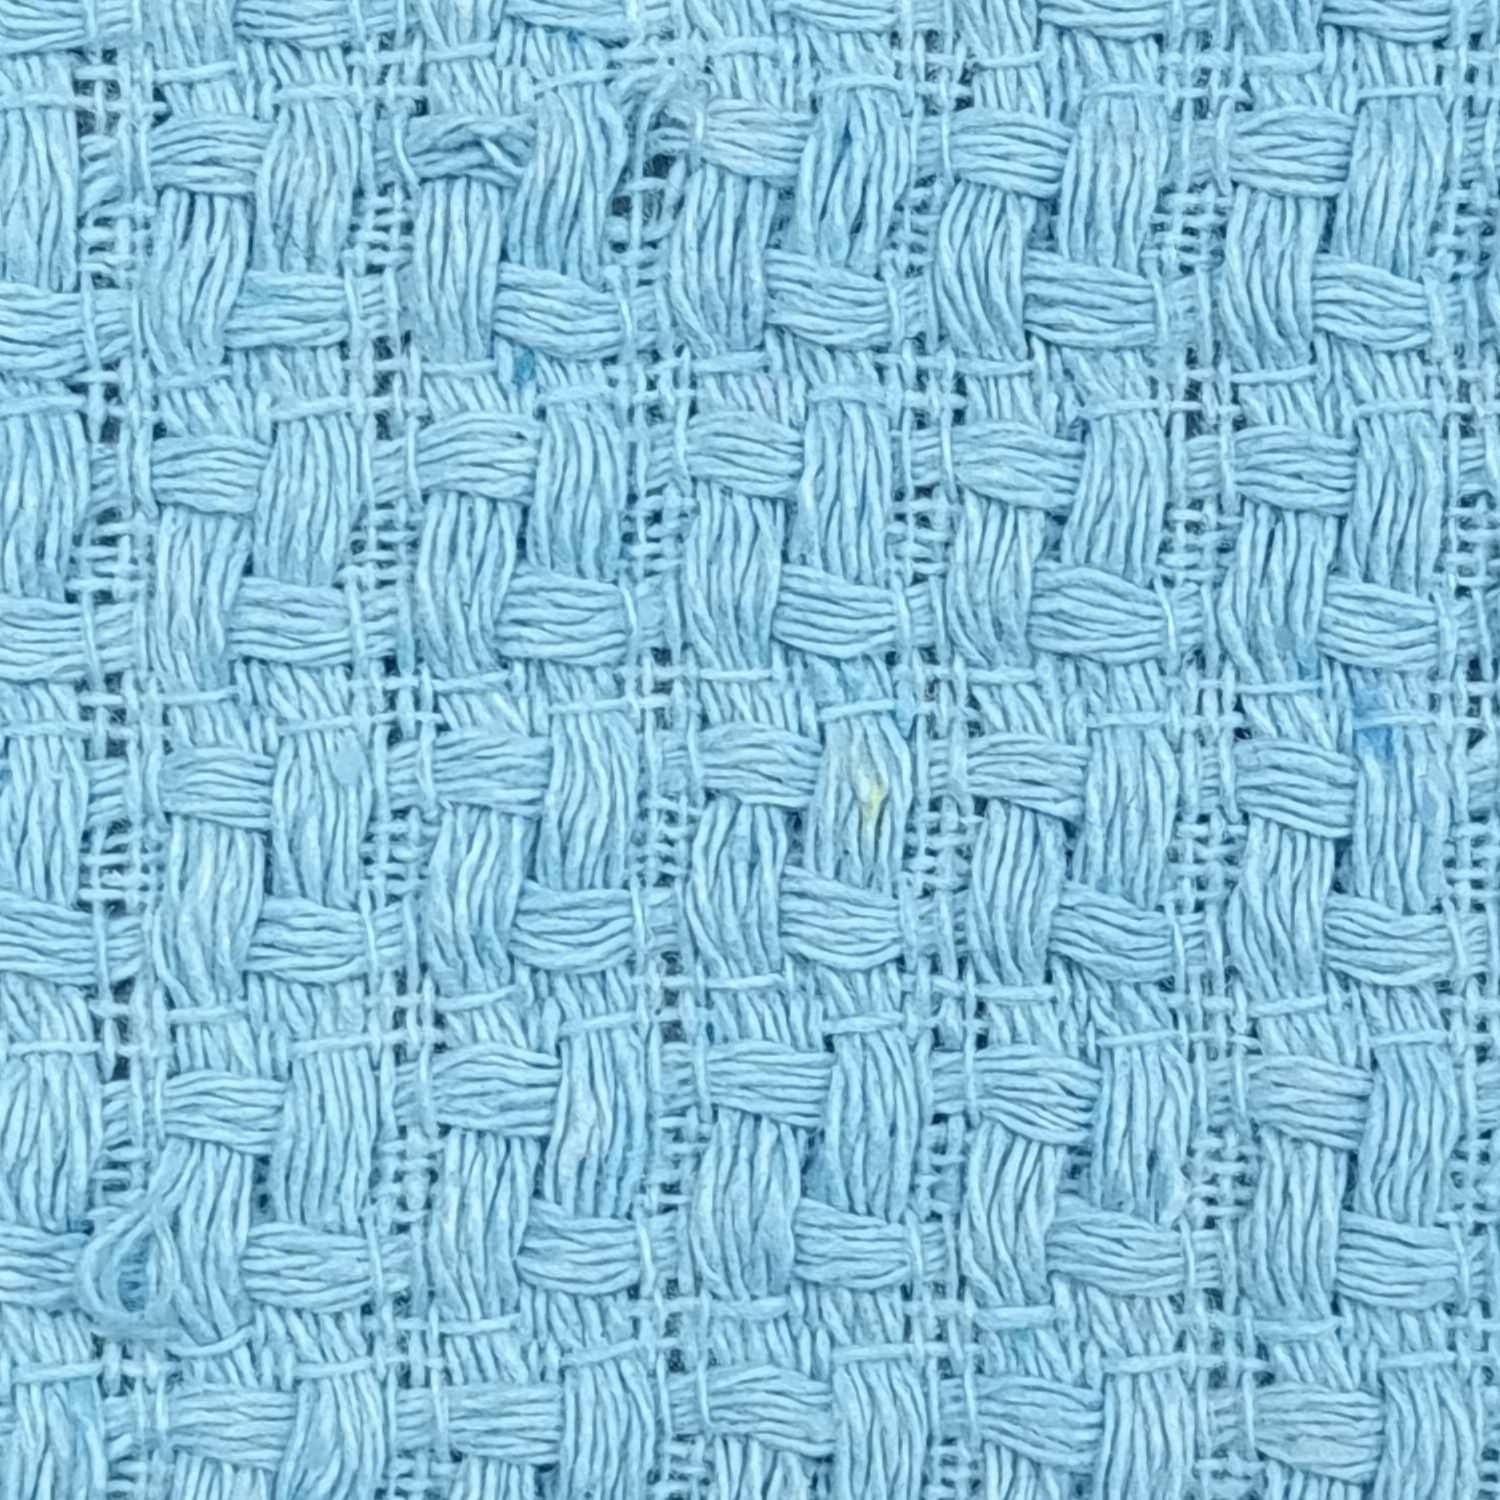 Dobby Weave Polyester Cotton Woven Fabric